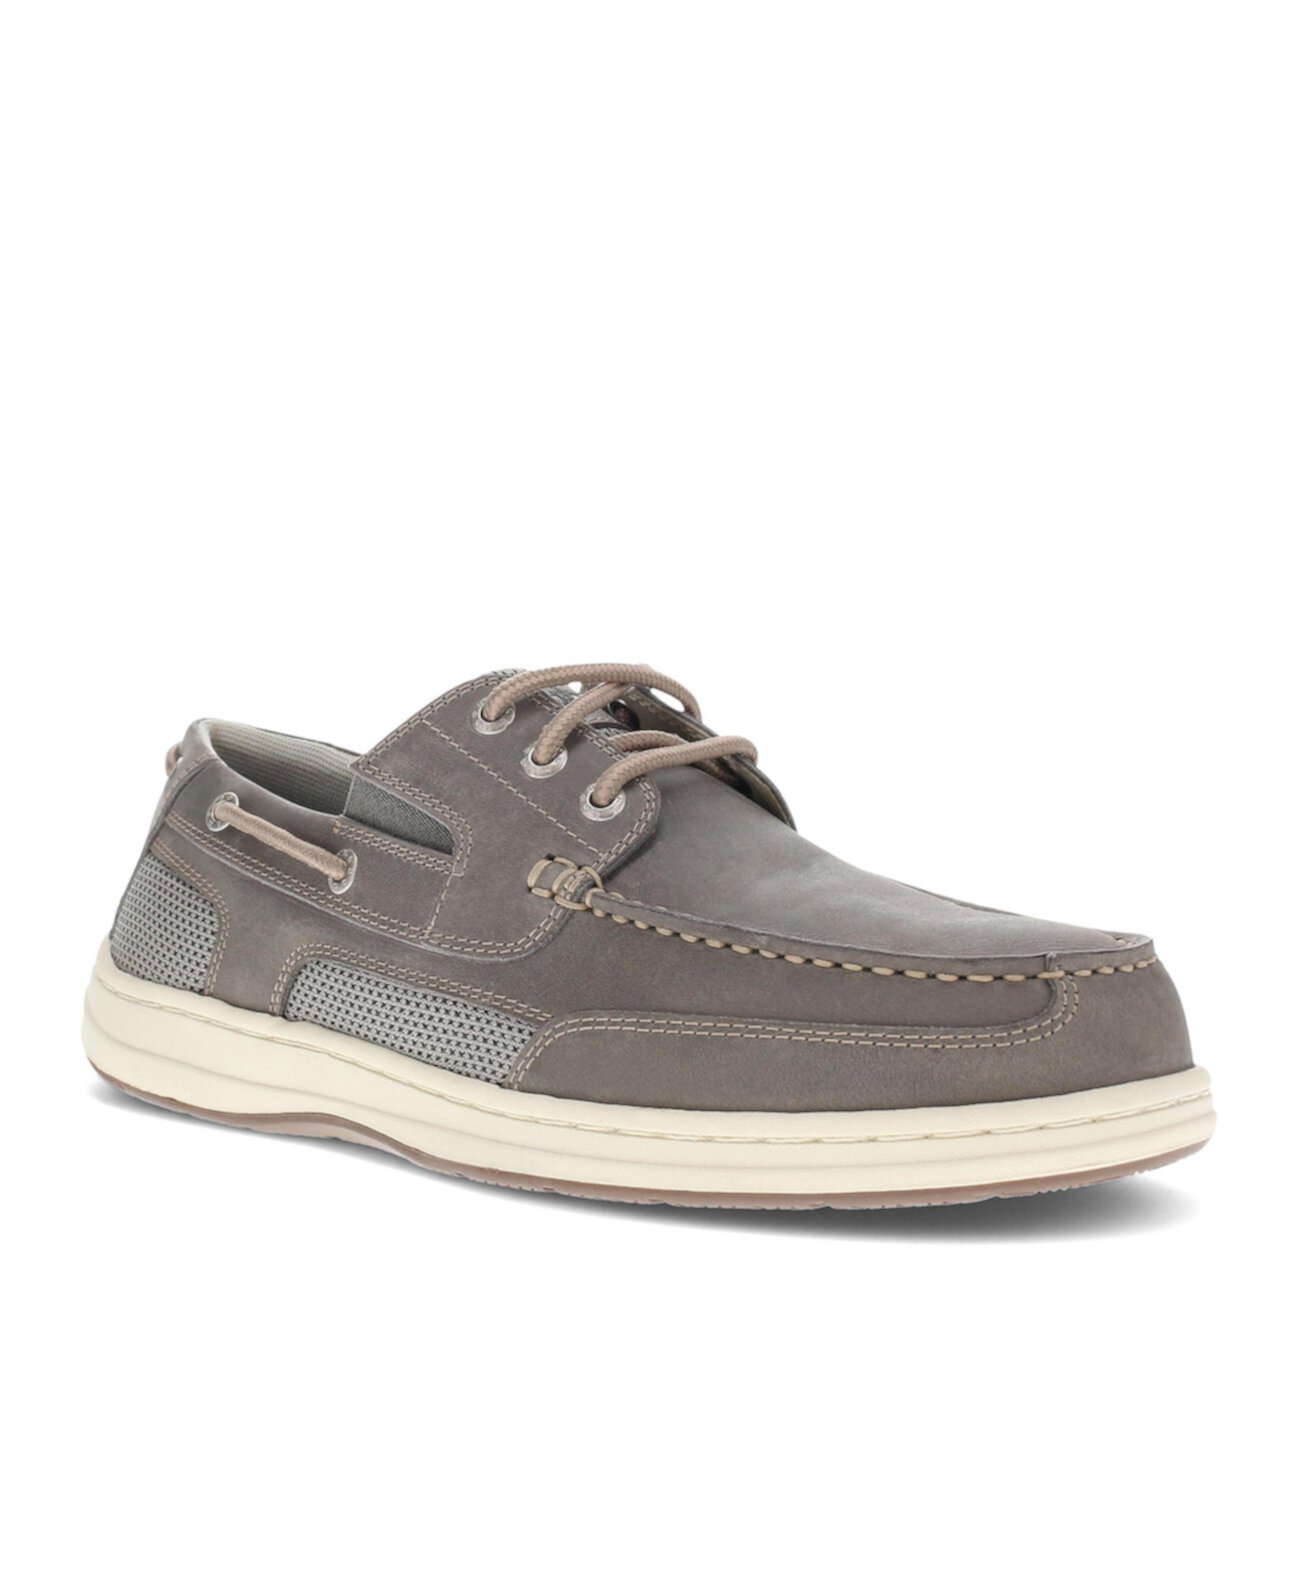 Men's Beacon Leather Casual Boat Shoe with NeverWet Dockers